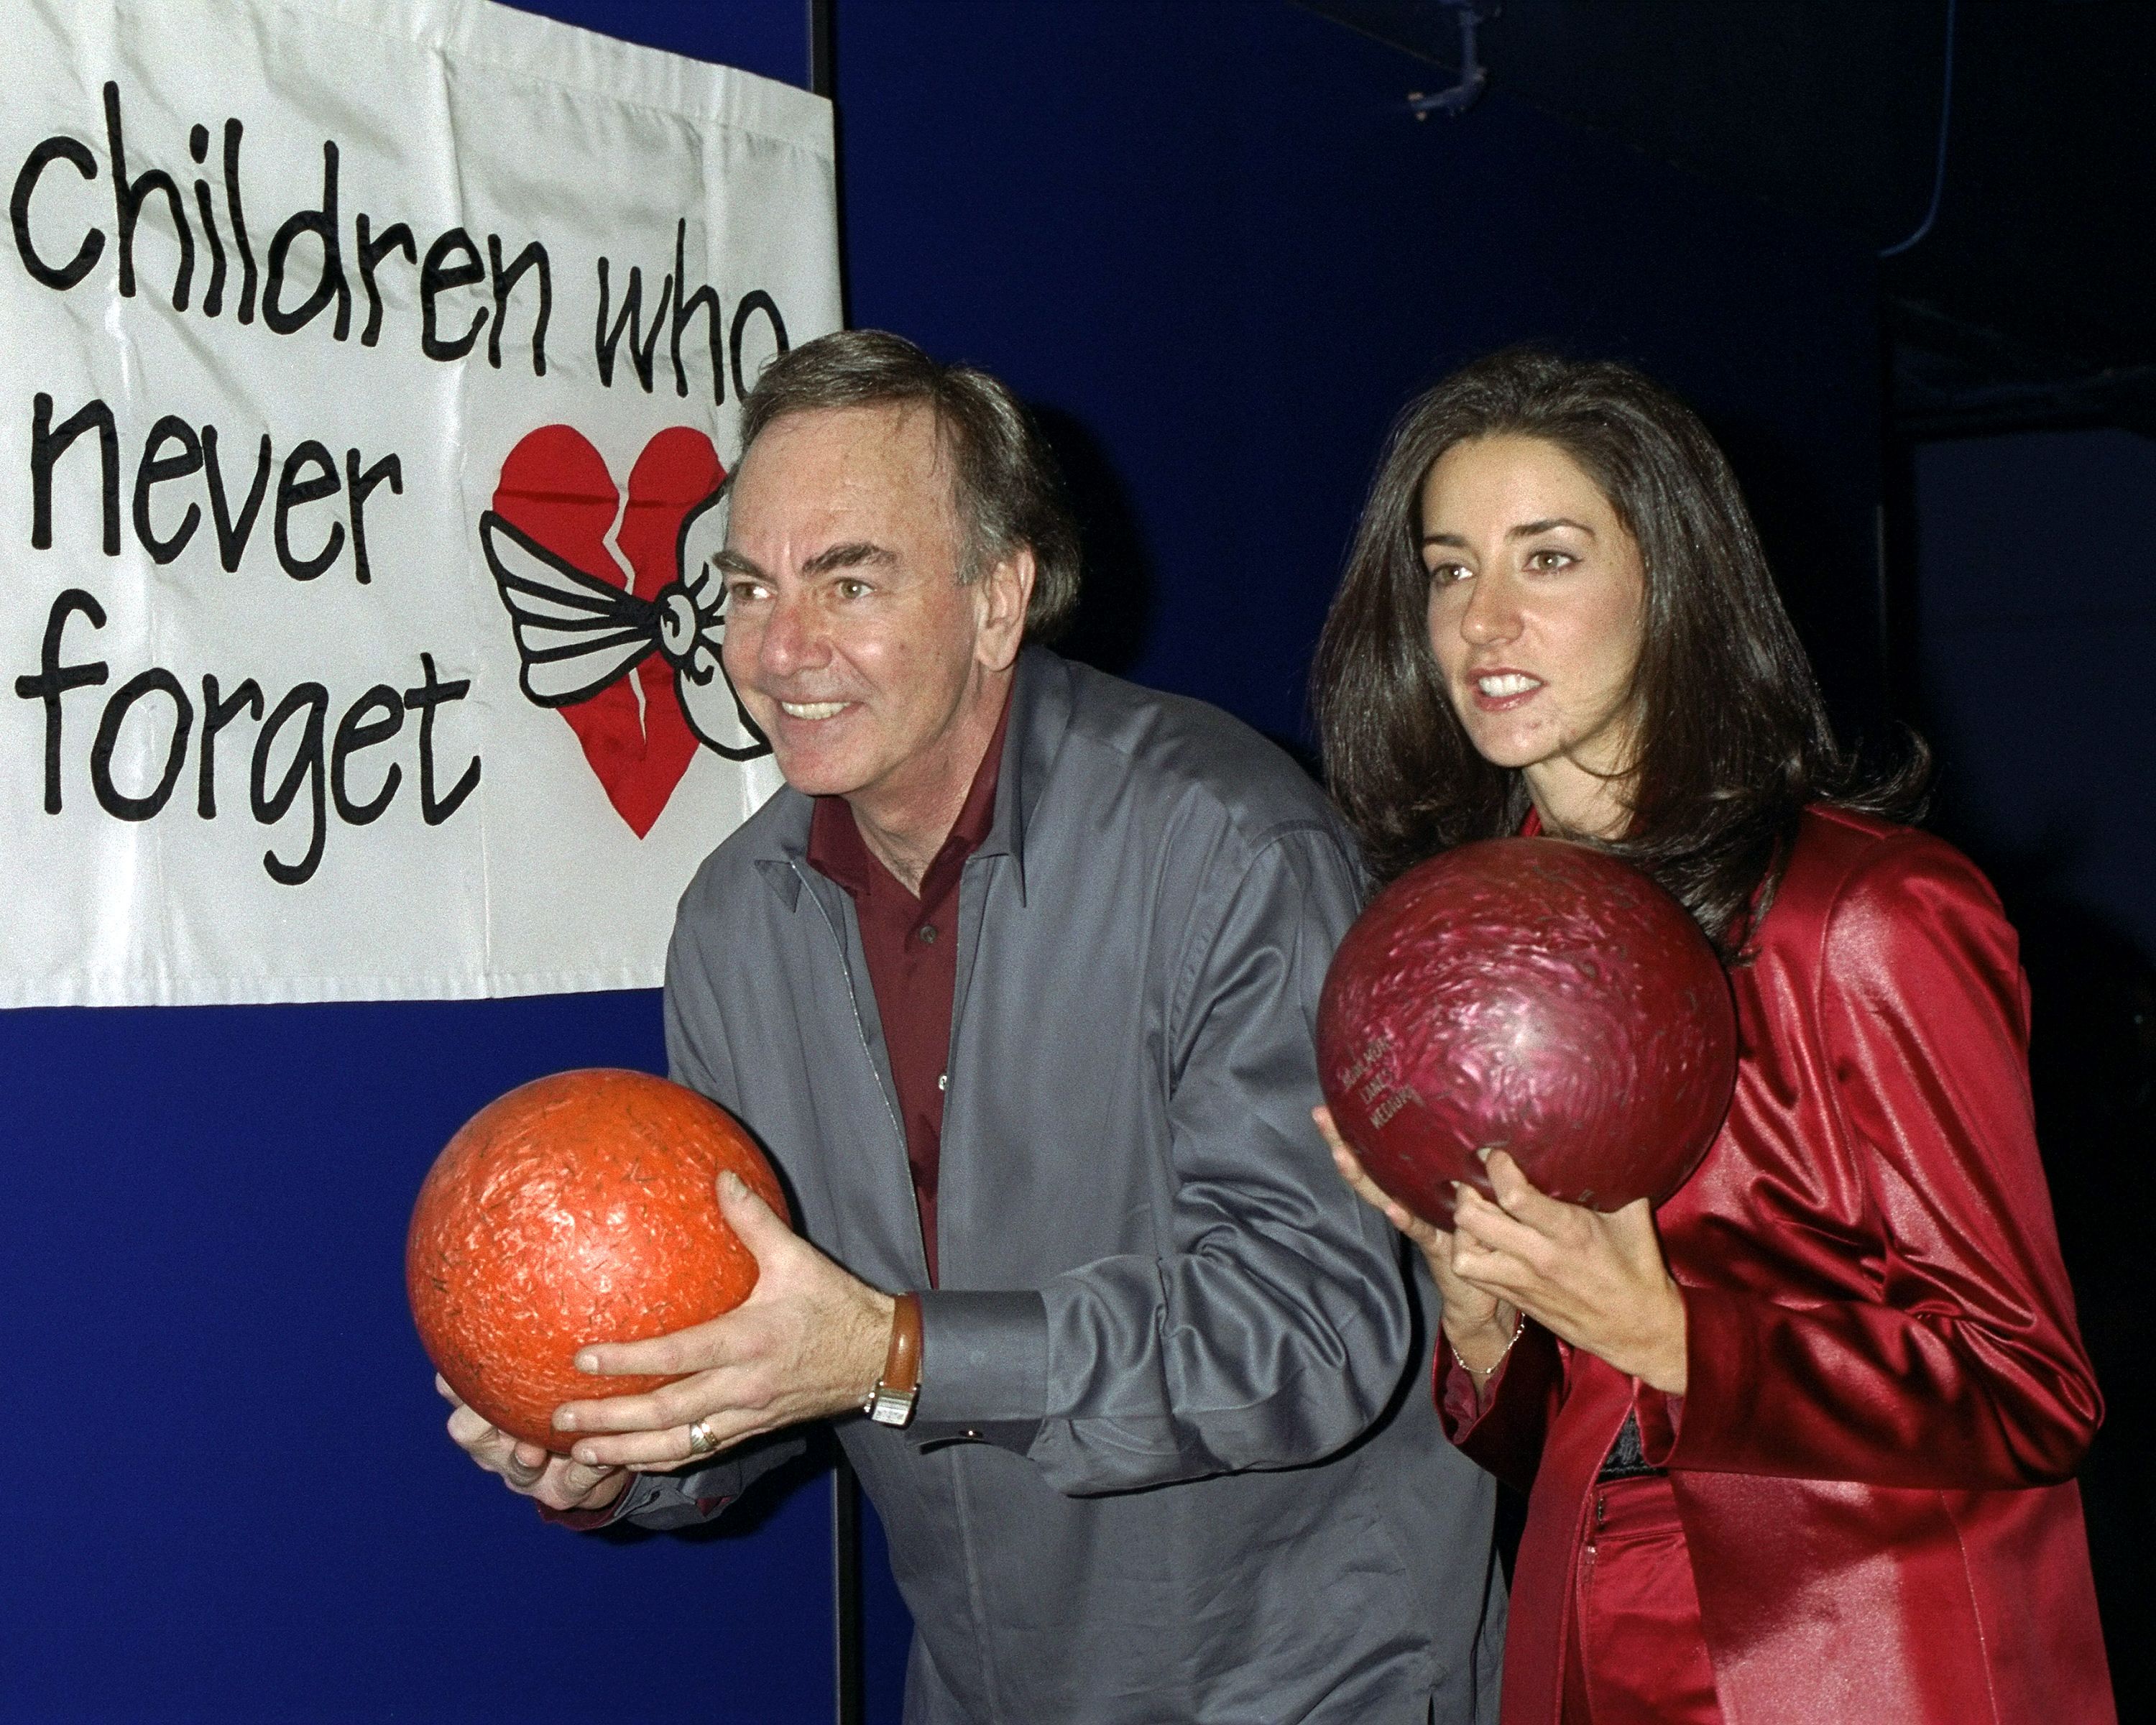 Neil Diamond and Elyn Diamond during the benefit of the Children Who Never Forget Foundation at Bowlmar Lanes, circa 2000. | Source: Getty Images